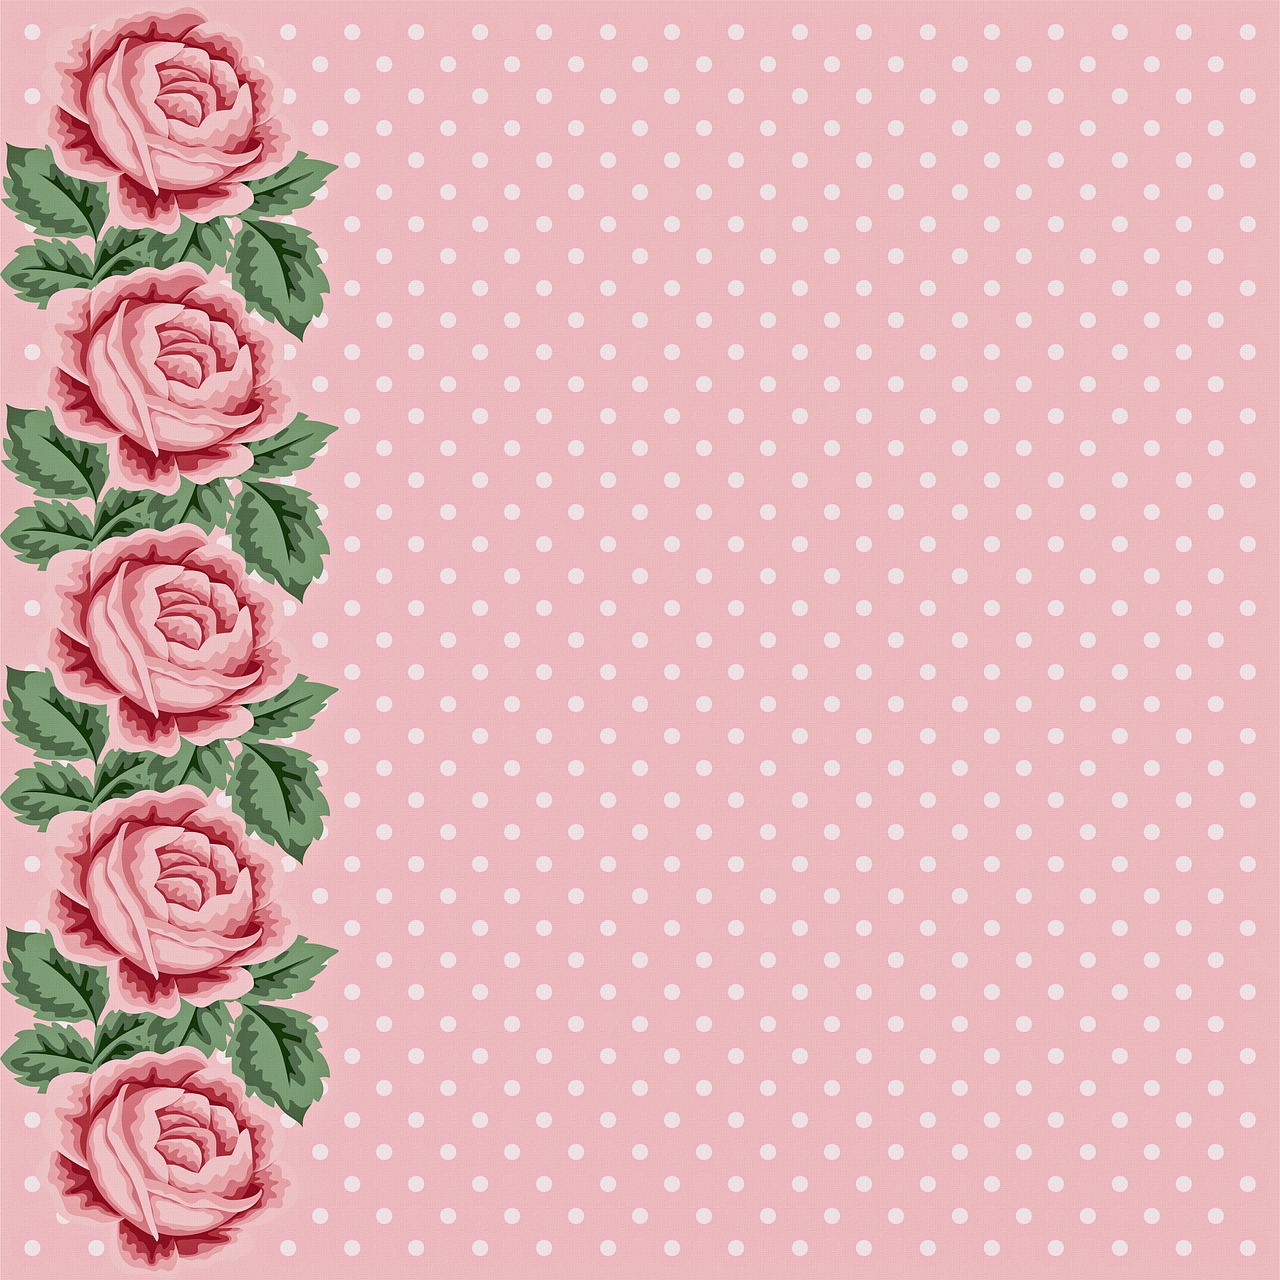 a pink rose border on a polka dot background, inspired by Katsushika Ōi, romanticism, 1950s illustration style, high quality illustration, four, facing front